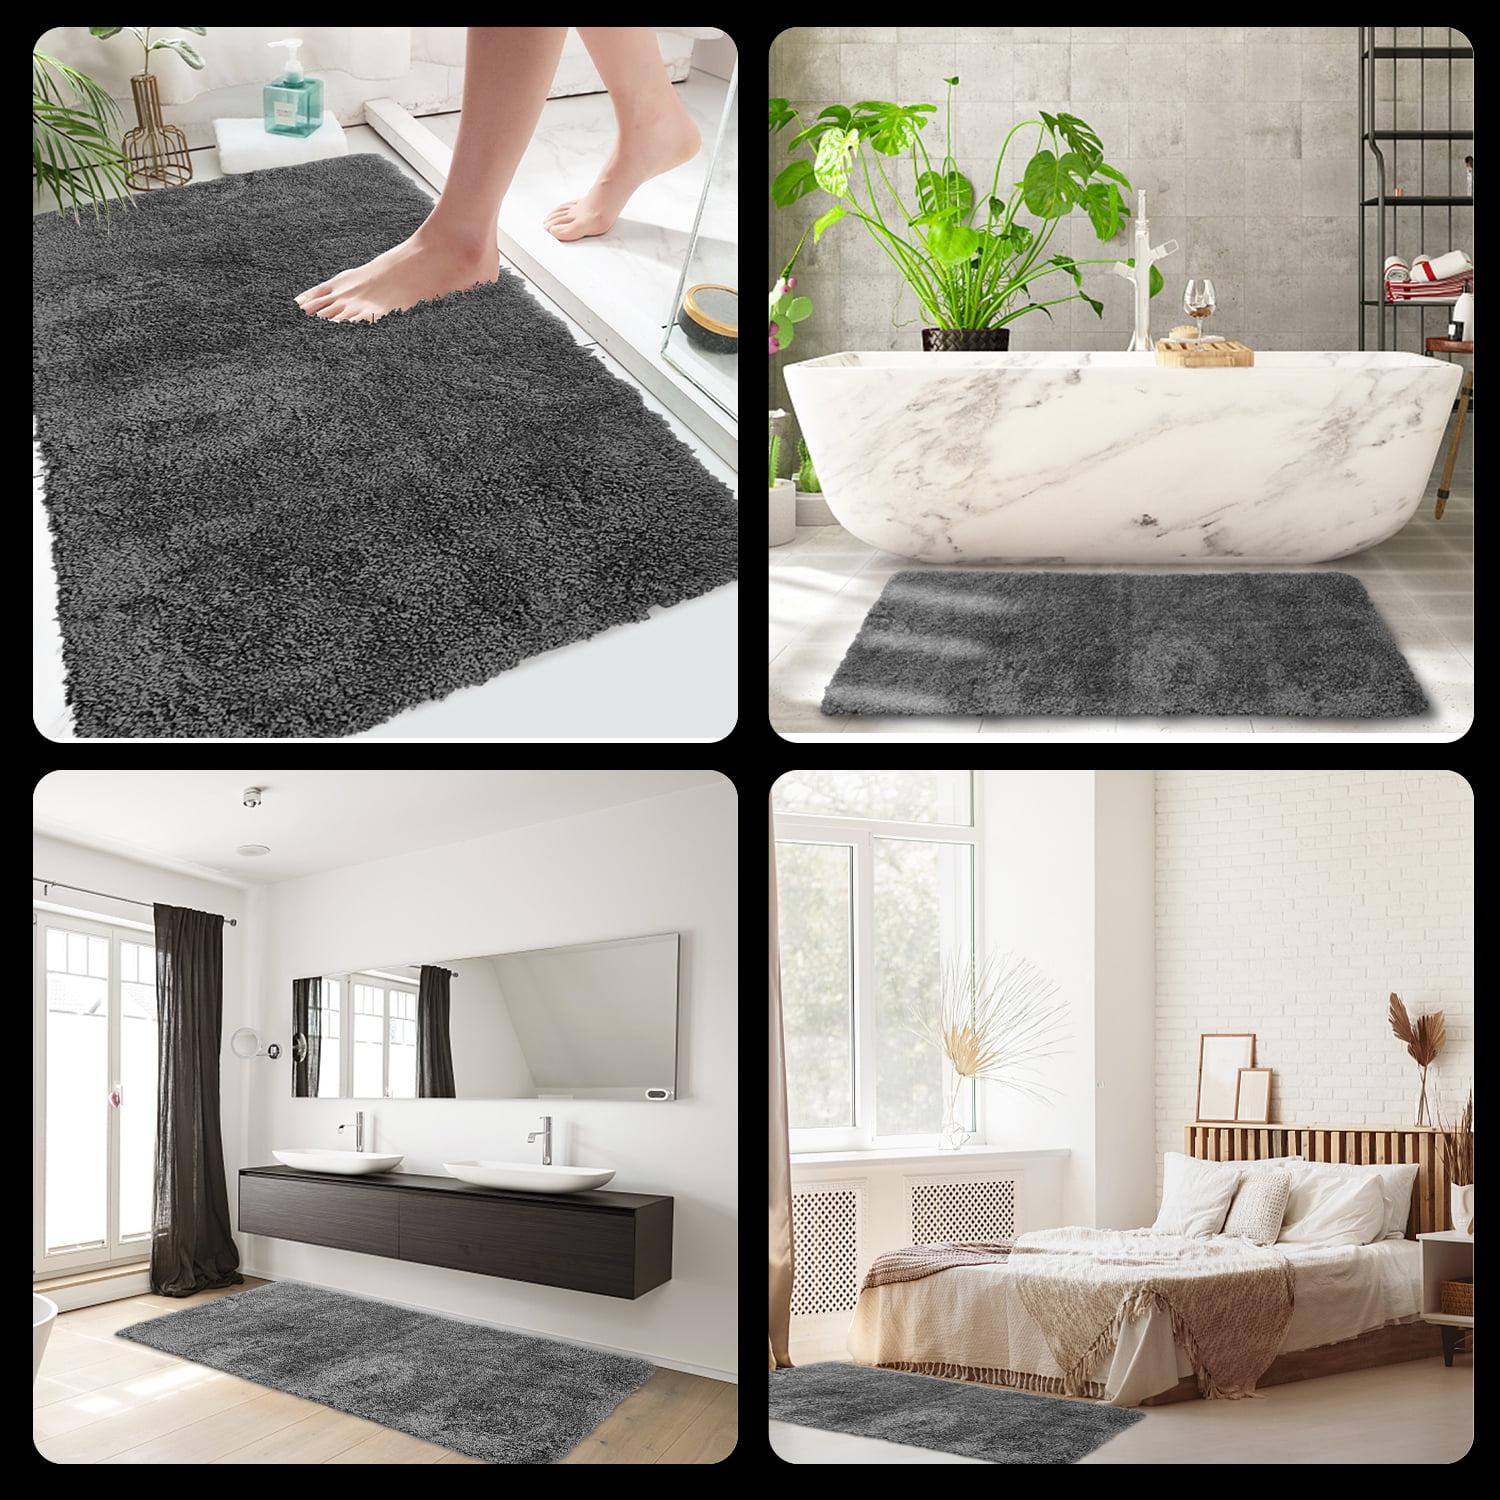 Campmoy Quick Dry Bath Mat Rug 24 inchx16 inch , Non Slip Quick Dry Super Absorbent Thin Bathroom Rugs for Bathroom Easy to Clean- Gray, Size: 24*16